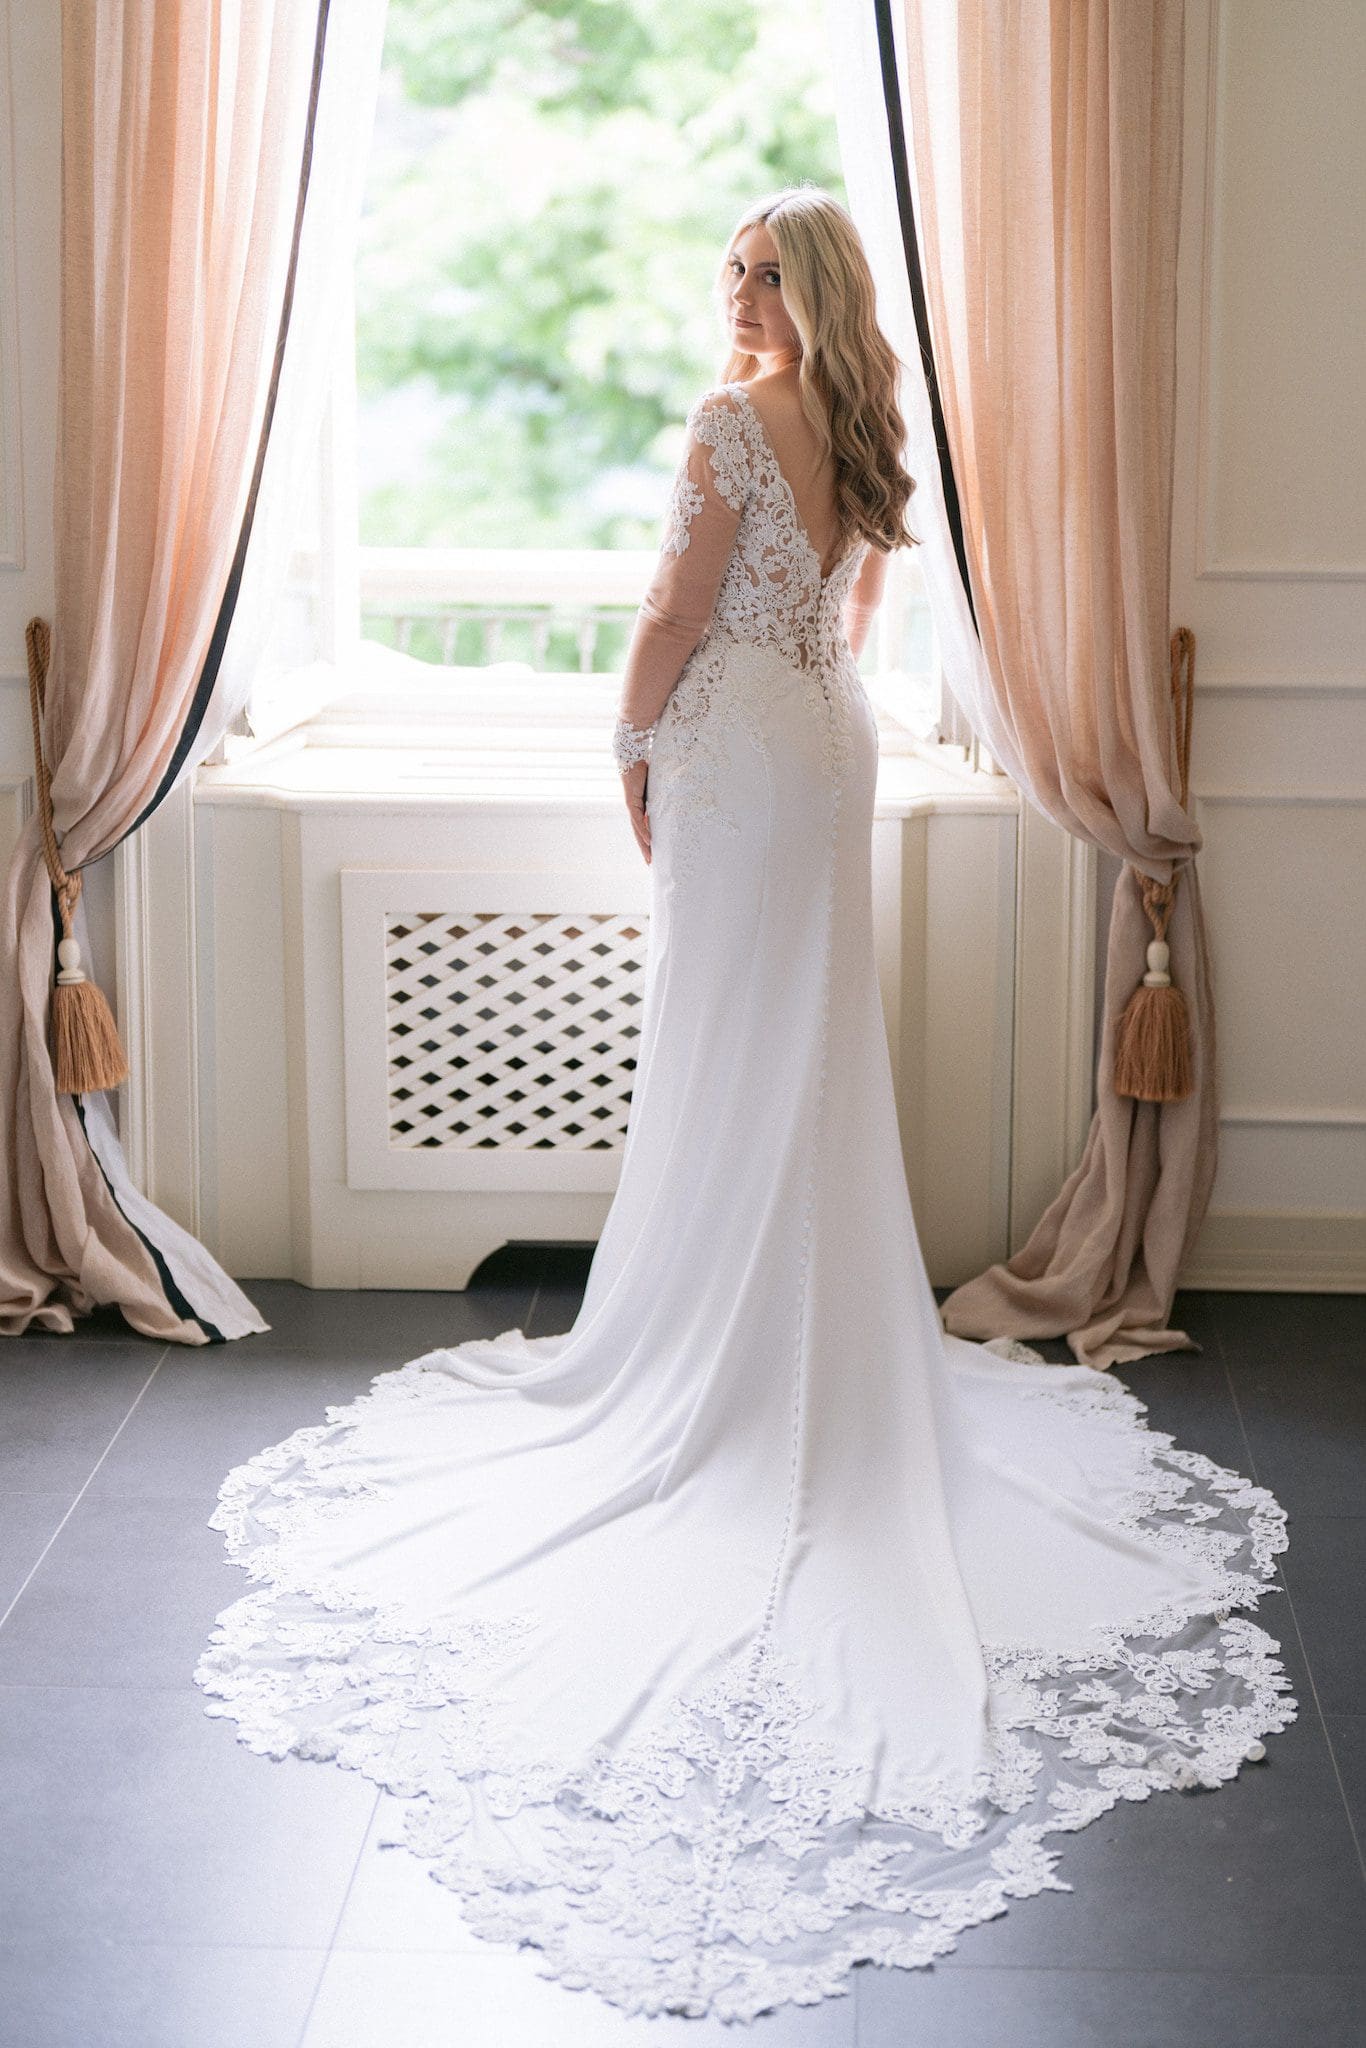 Charlotte chose the Mimi by Blue By Enzoani as her wedding dress